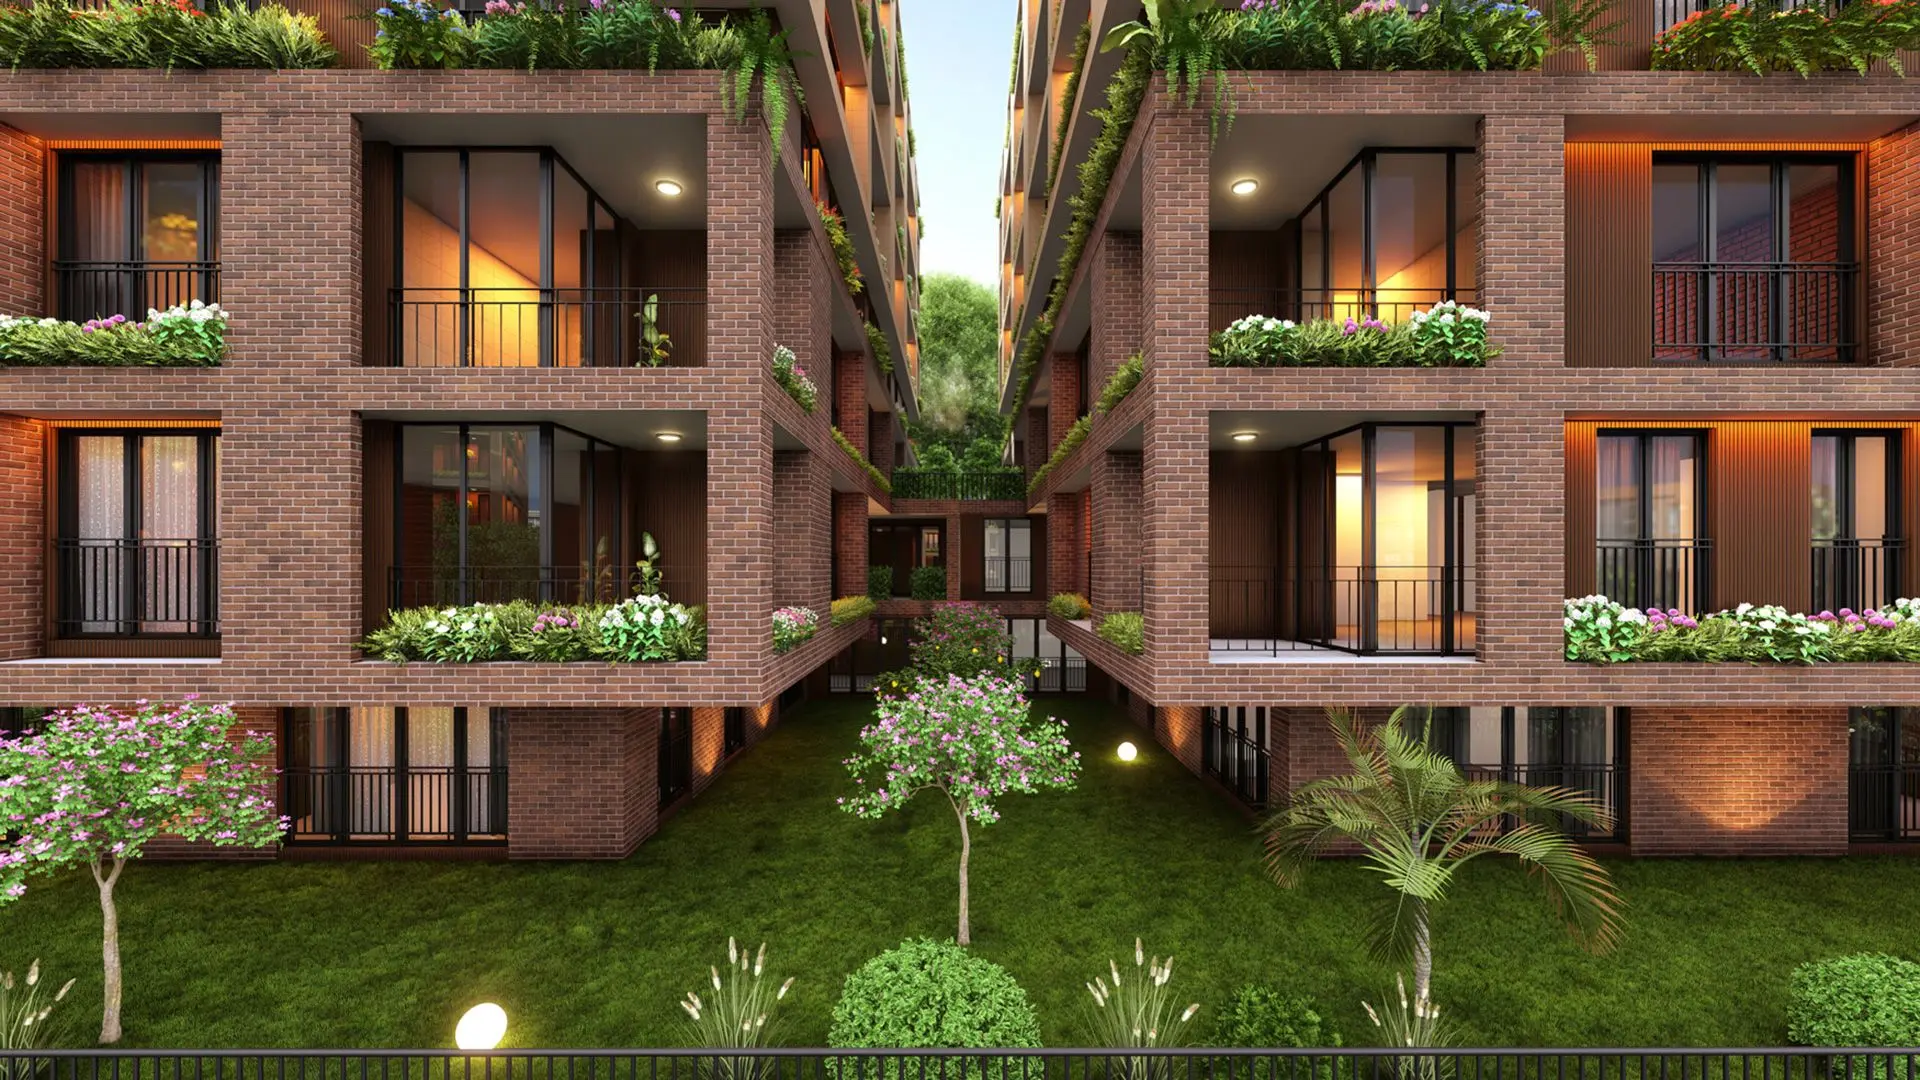 LUXURIOUS PROJECT IN ISTANBUL NEAR THE FAMOUS JULY 15 BRIDGE